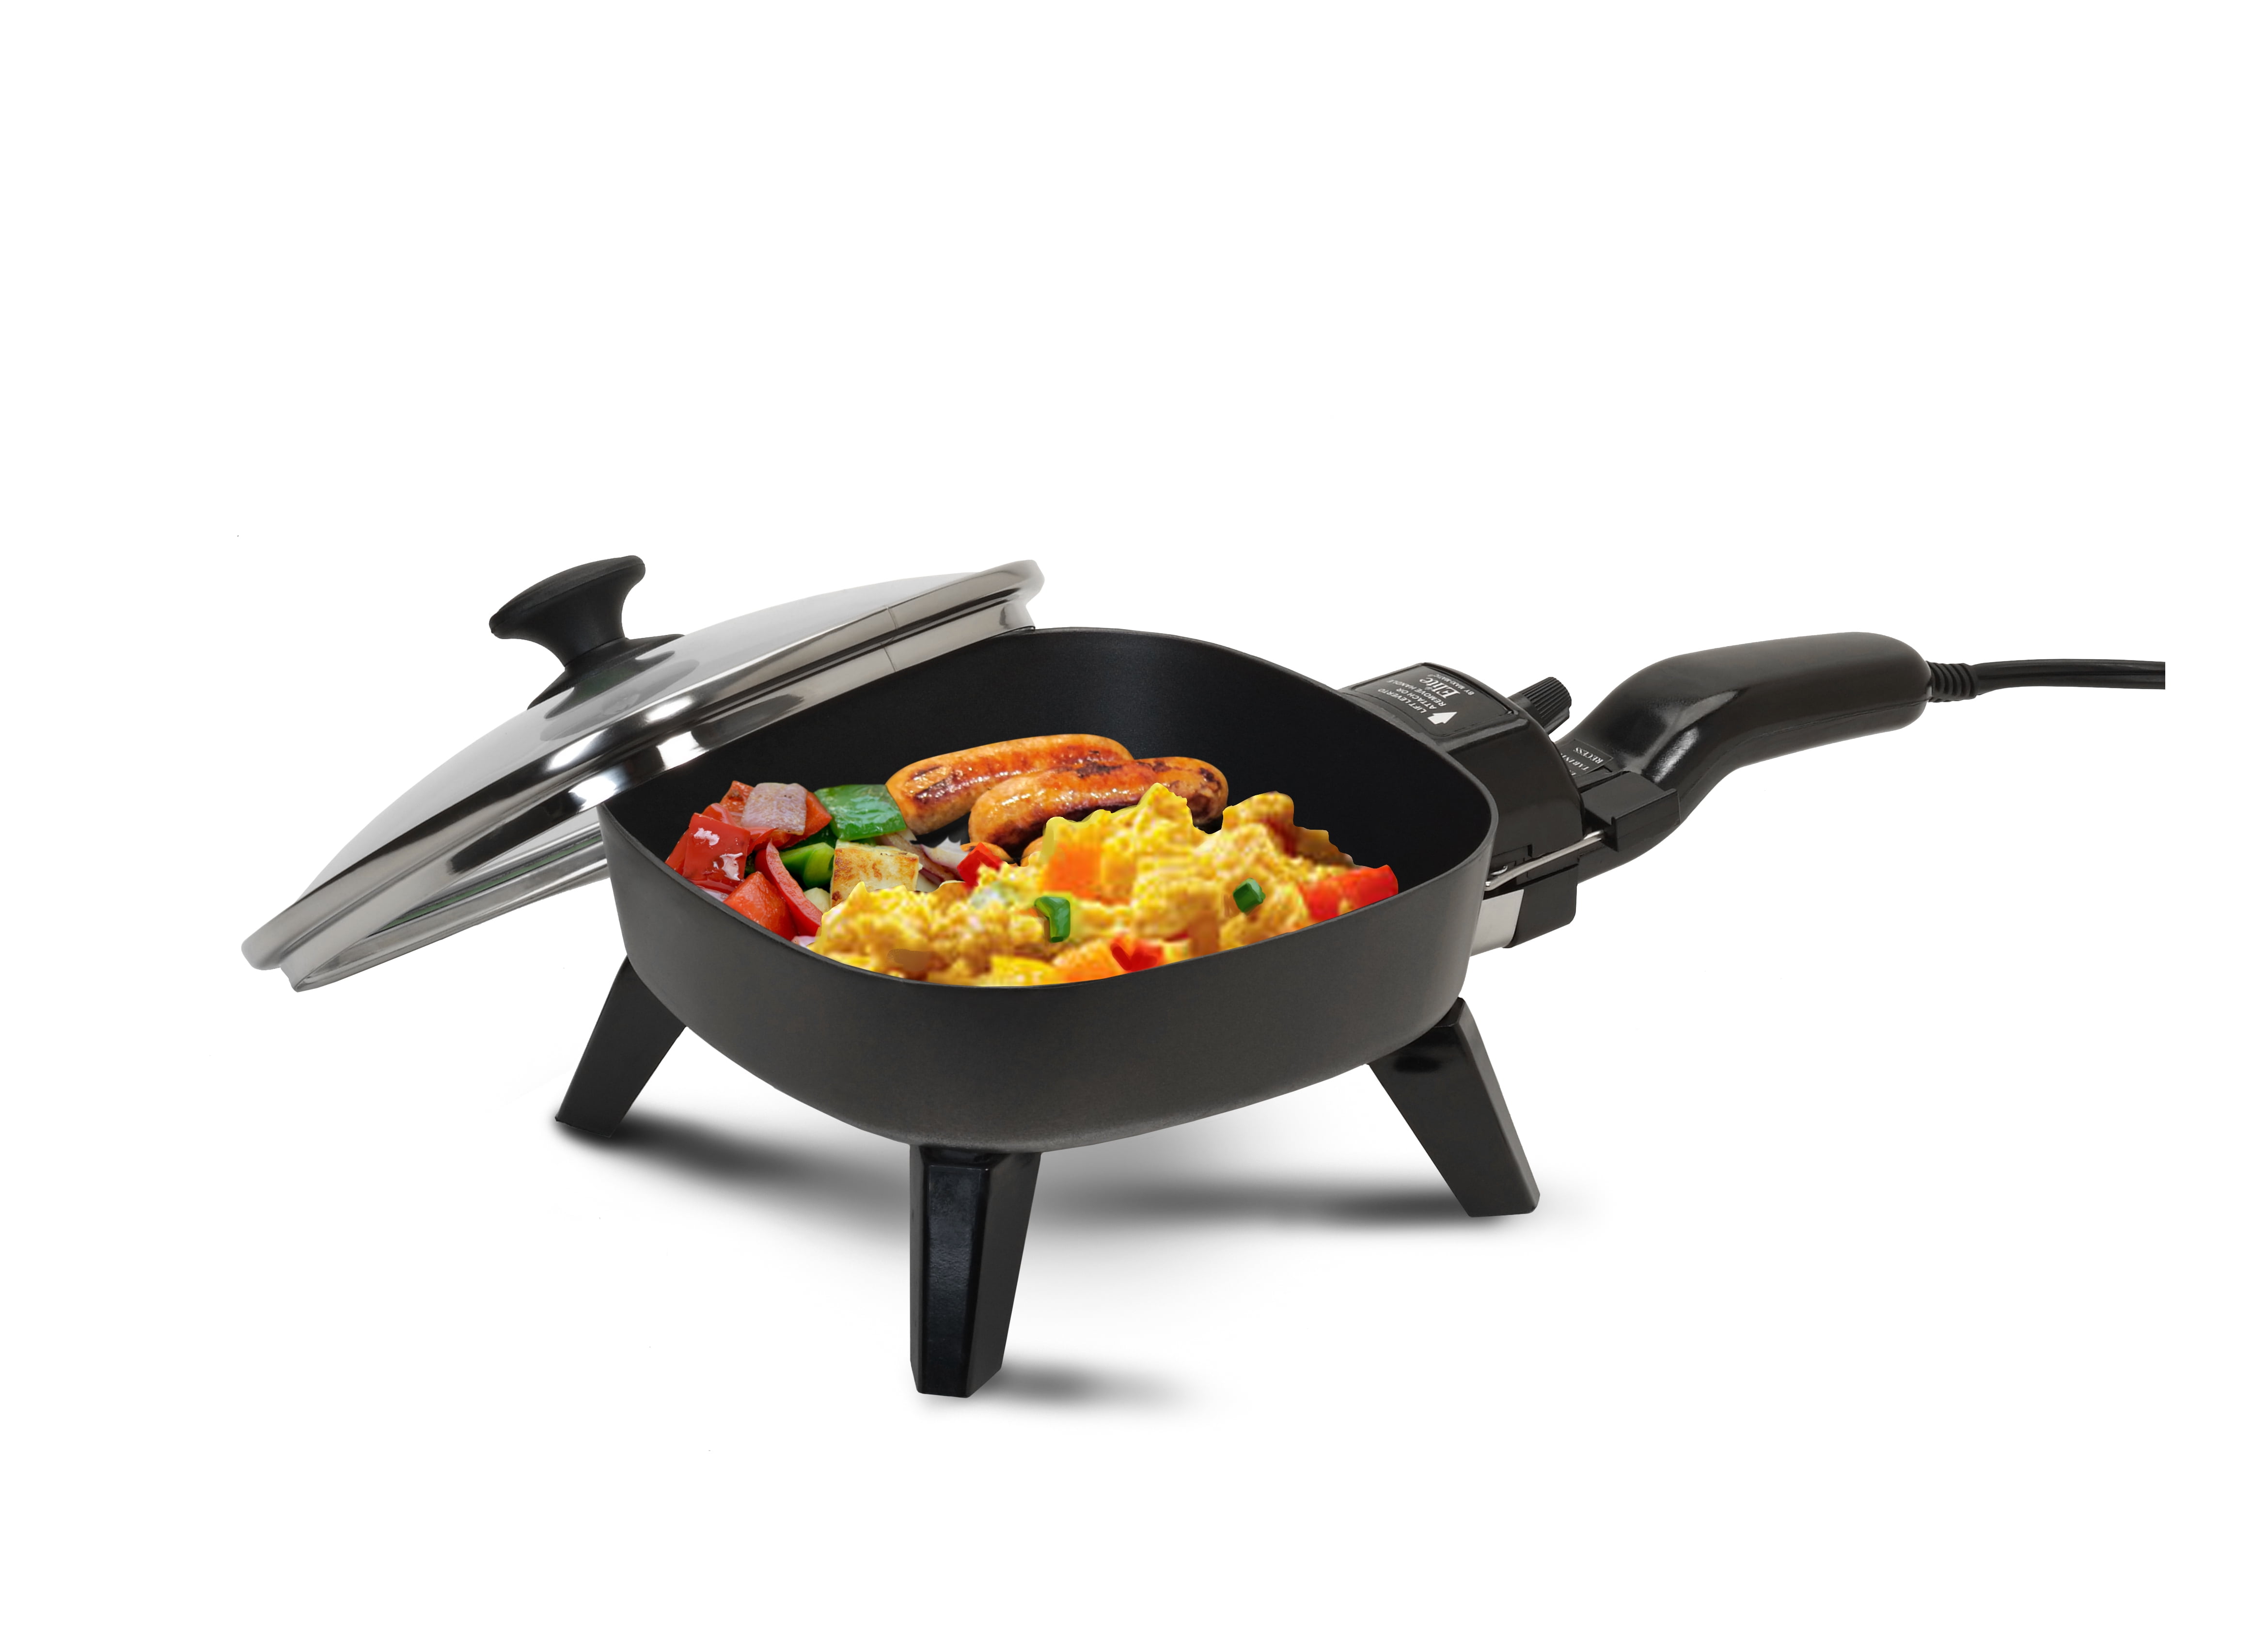 Elite Gourmet EG-1500R 15-Inch Electric Skillet with Glass Lid